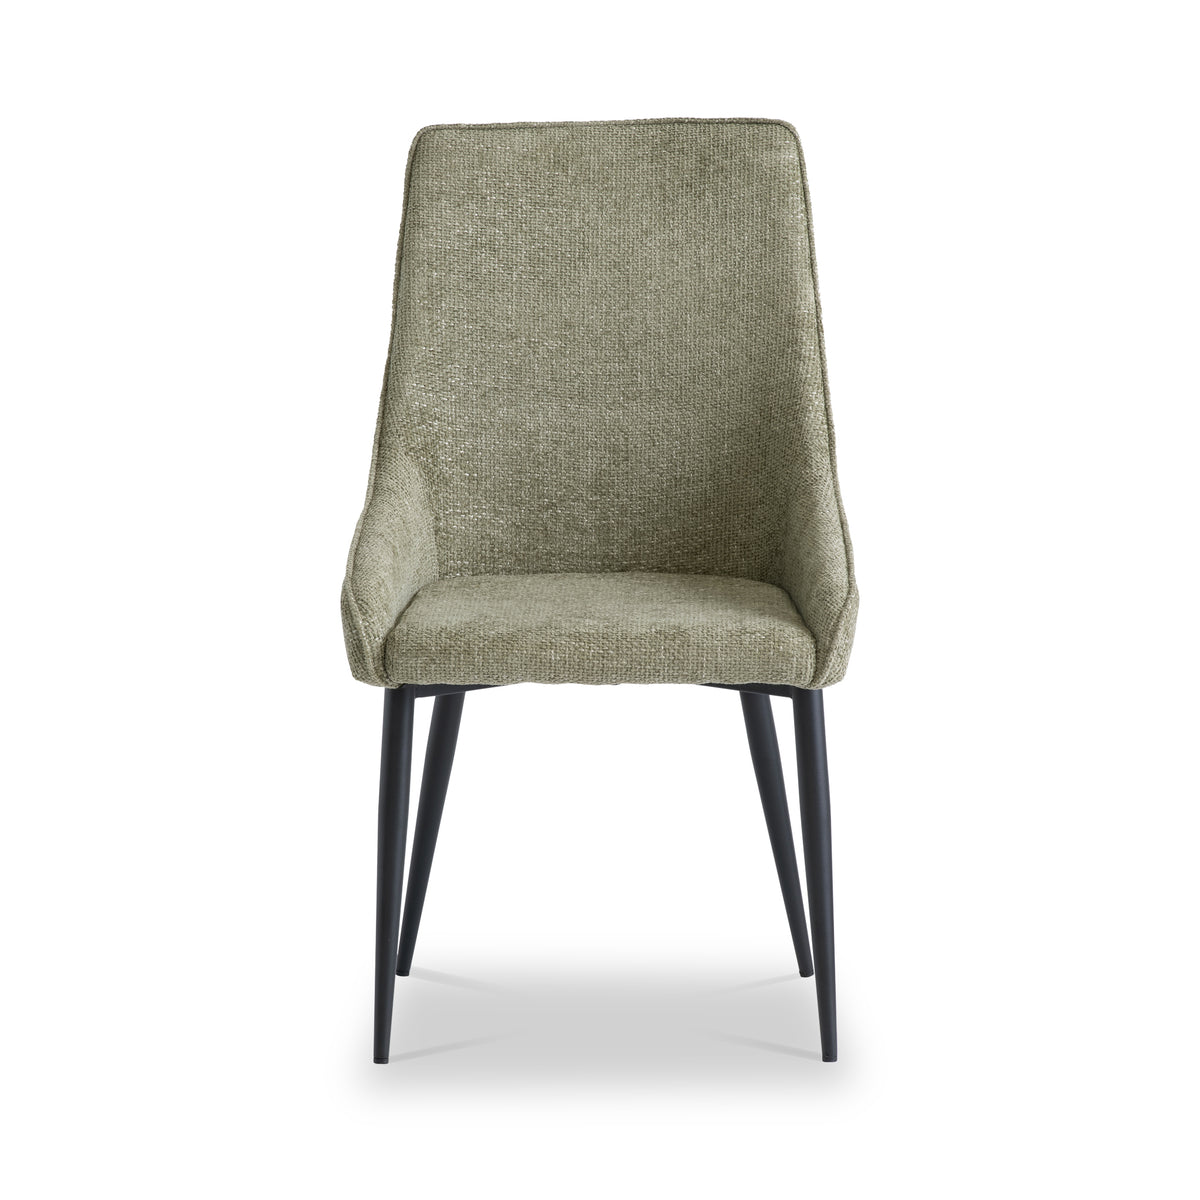 Perth Olive Dining Chair by Roseland Furniture